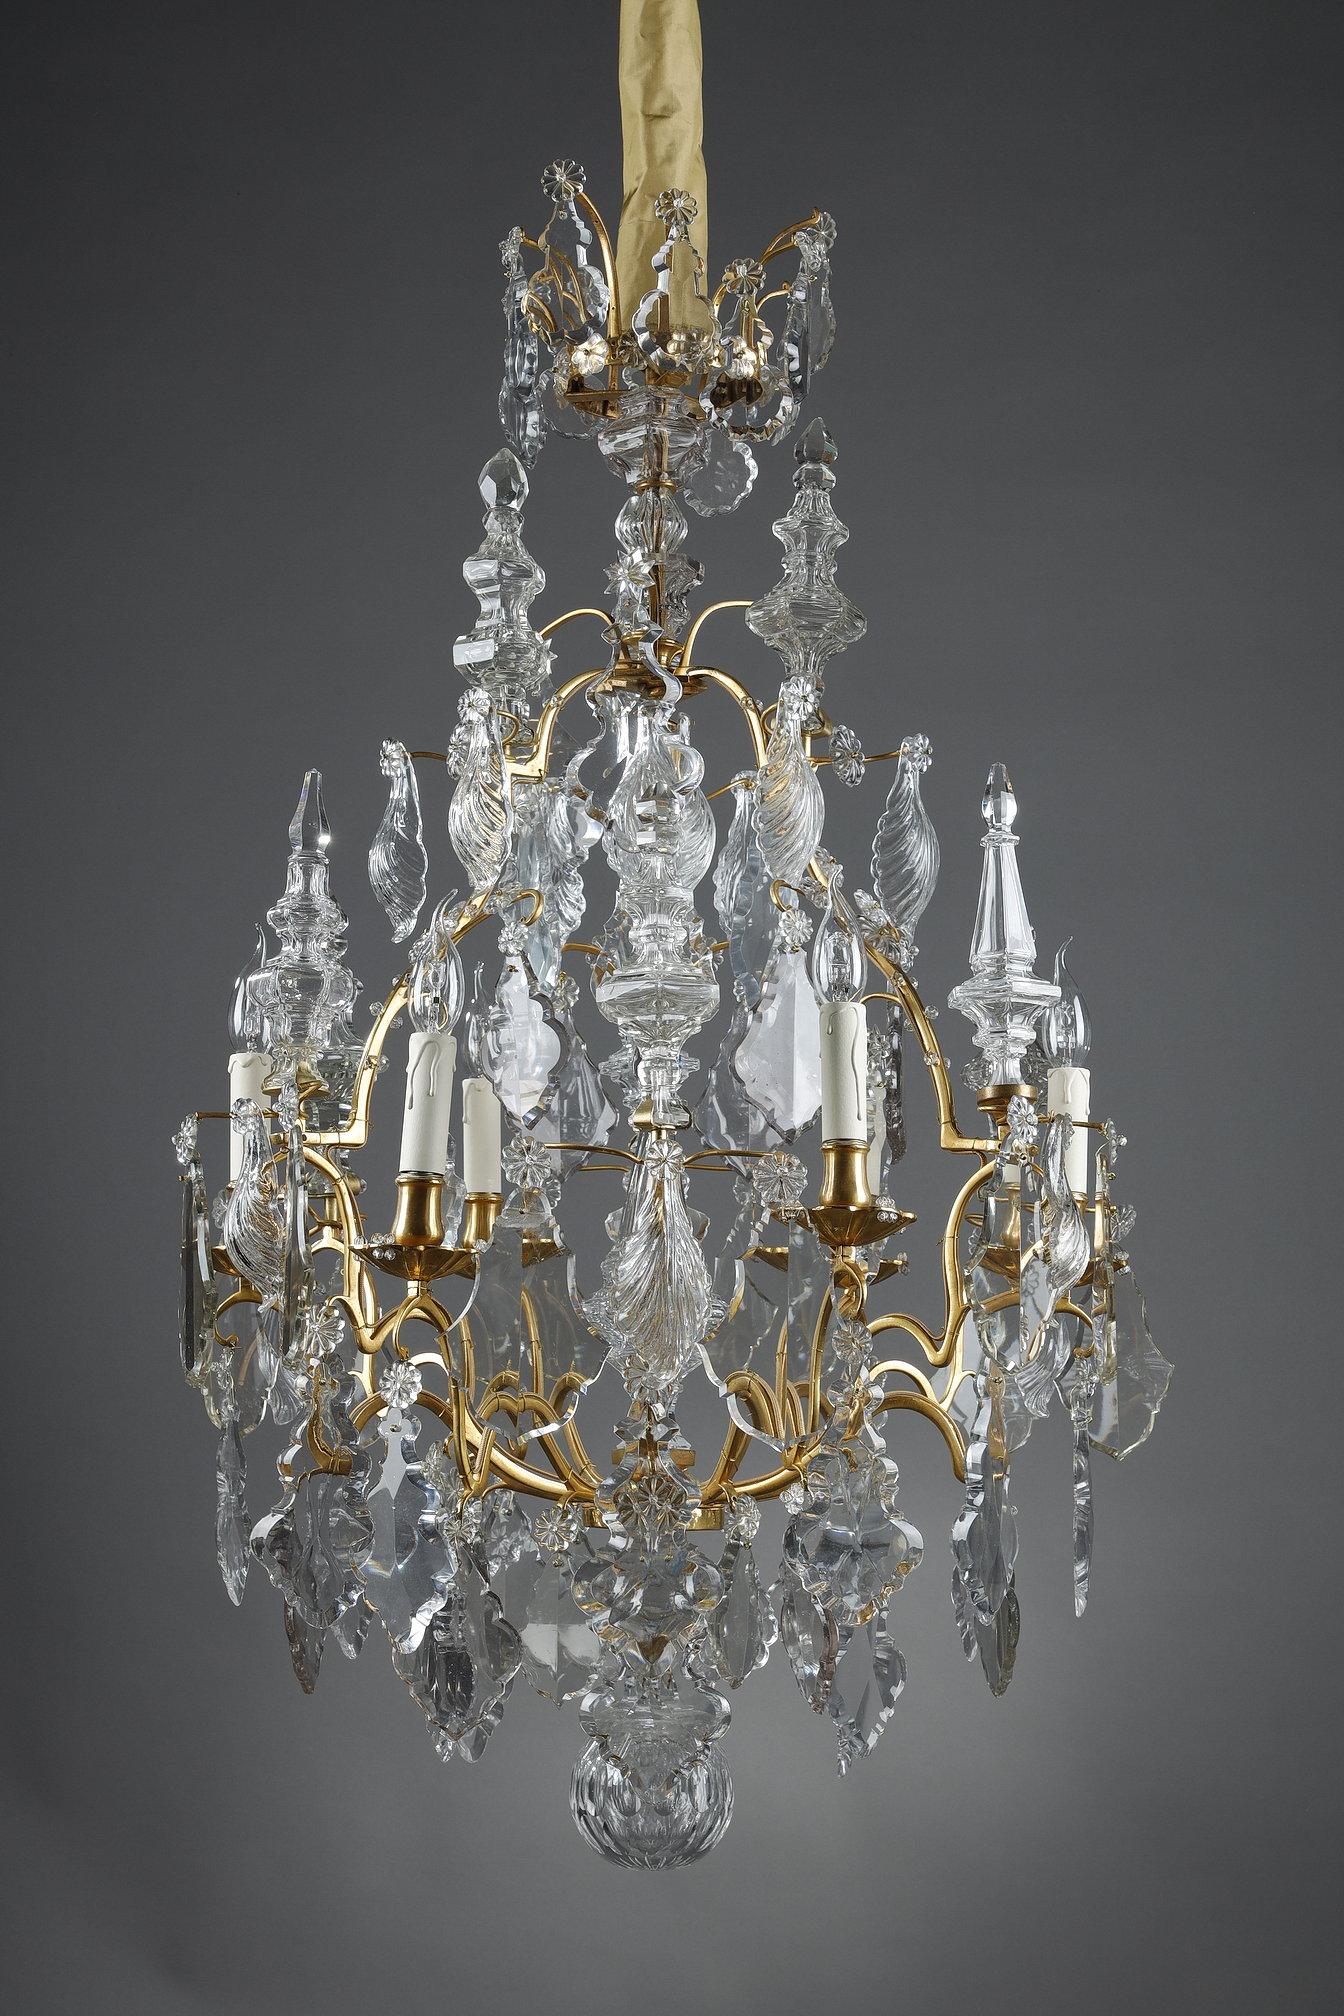 Large six-light cage chandelier, with its gilded bronze frame, richly adorned with tassels and cut crystals as well as glass daggers. It ends with a faceted ball. This Louis XV-style chandelier was made at the end of the 19th century and has been